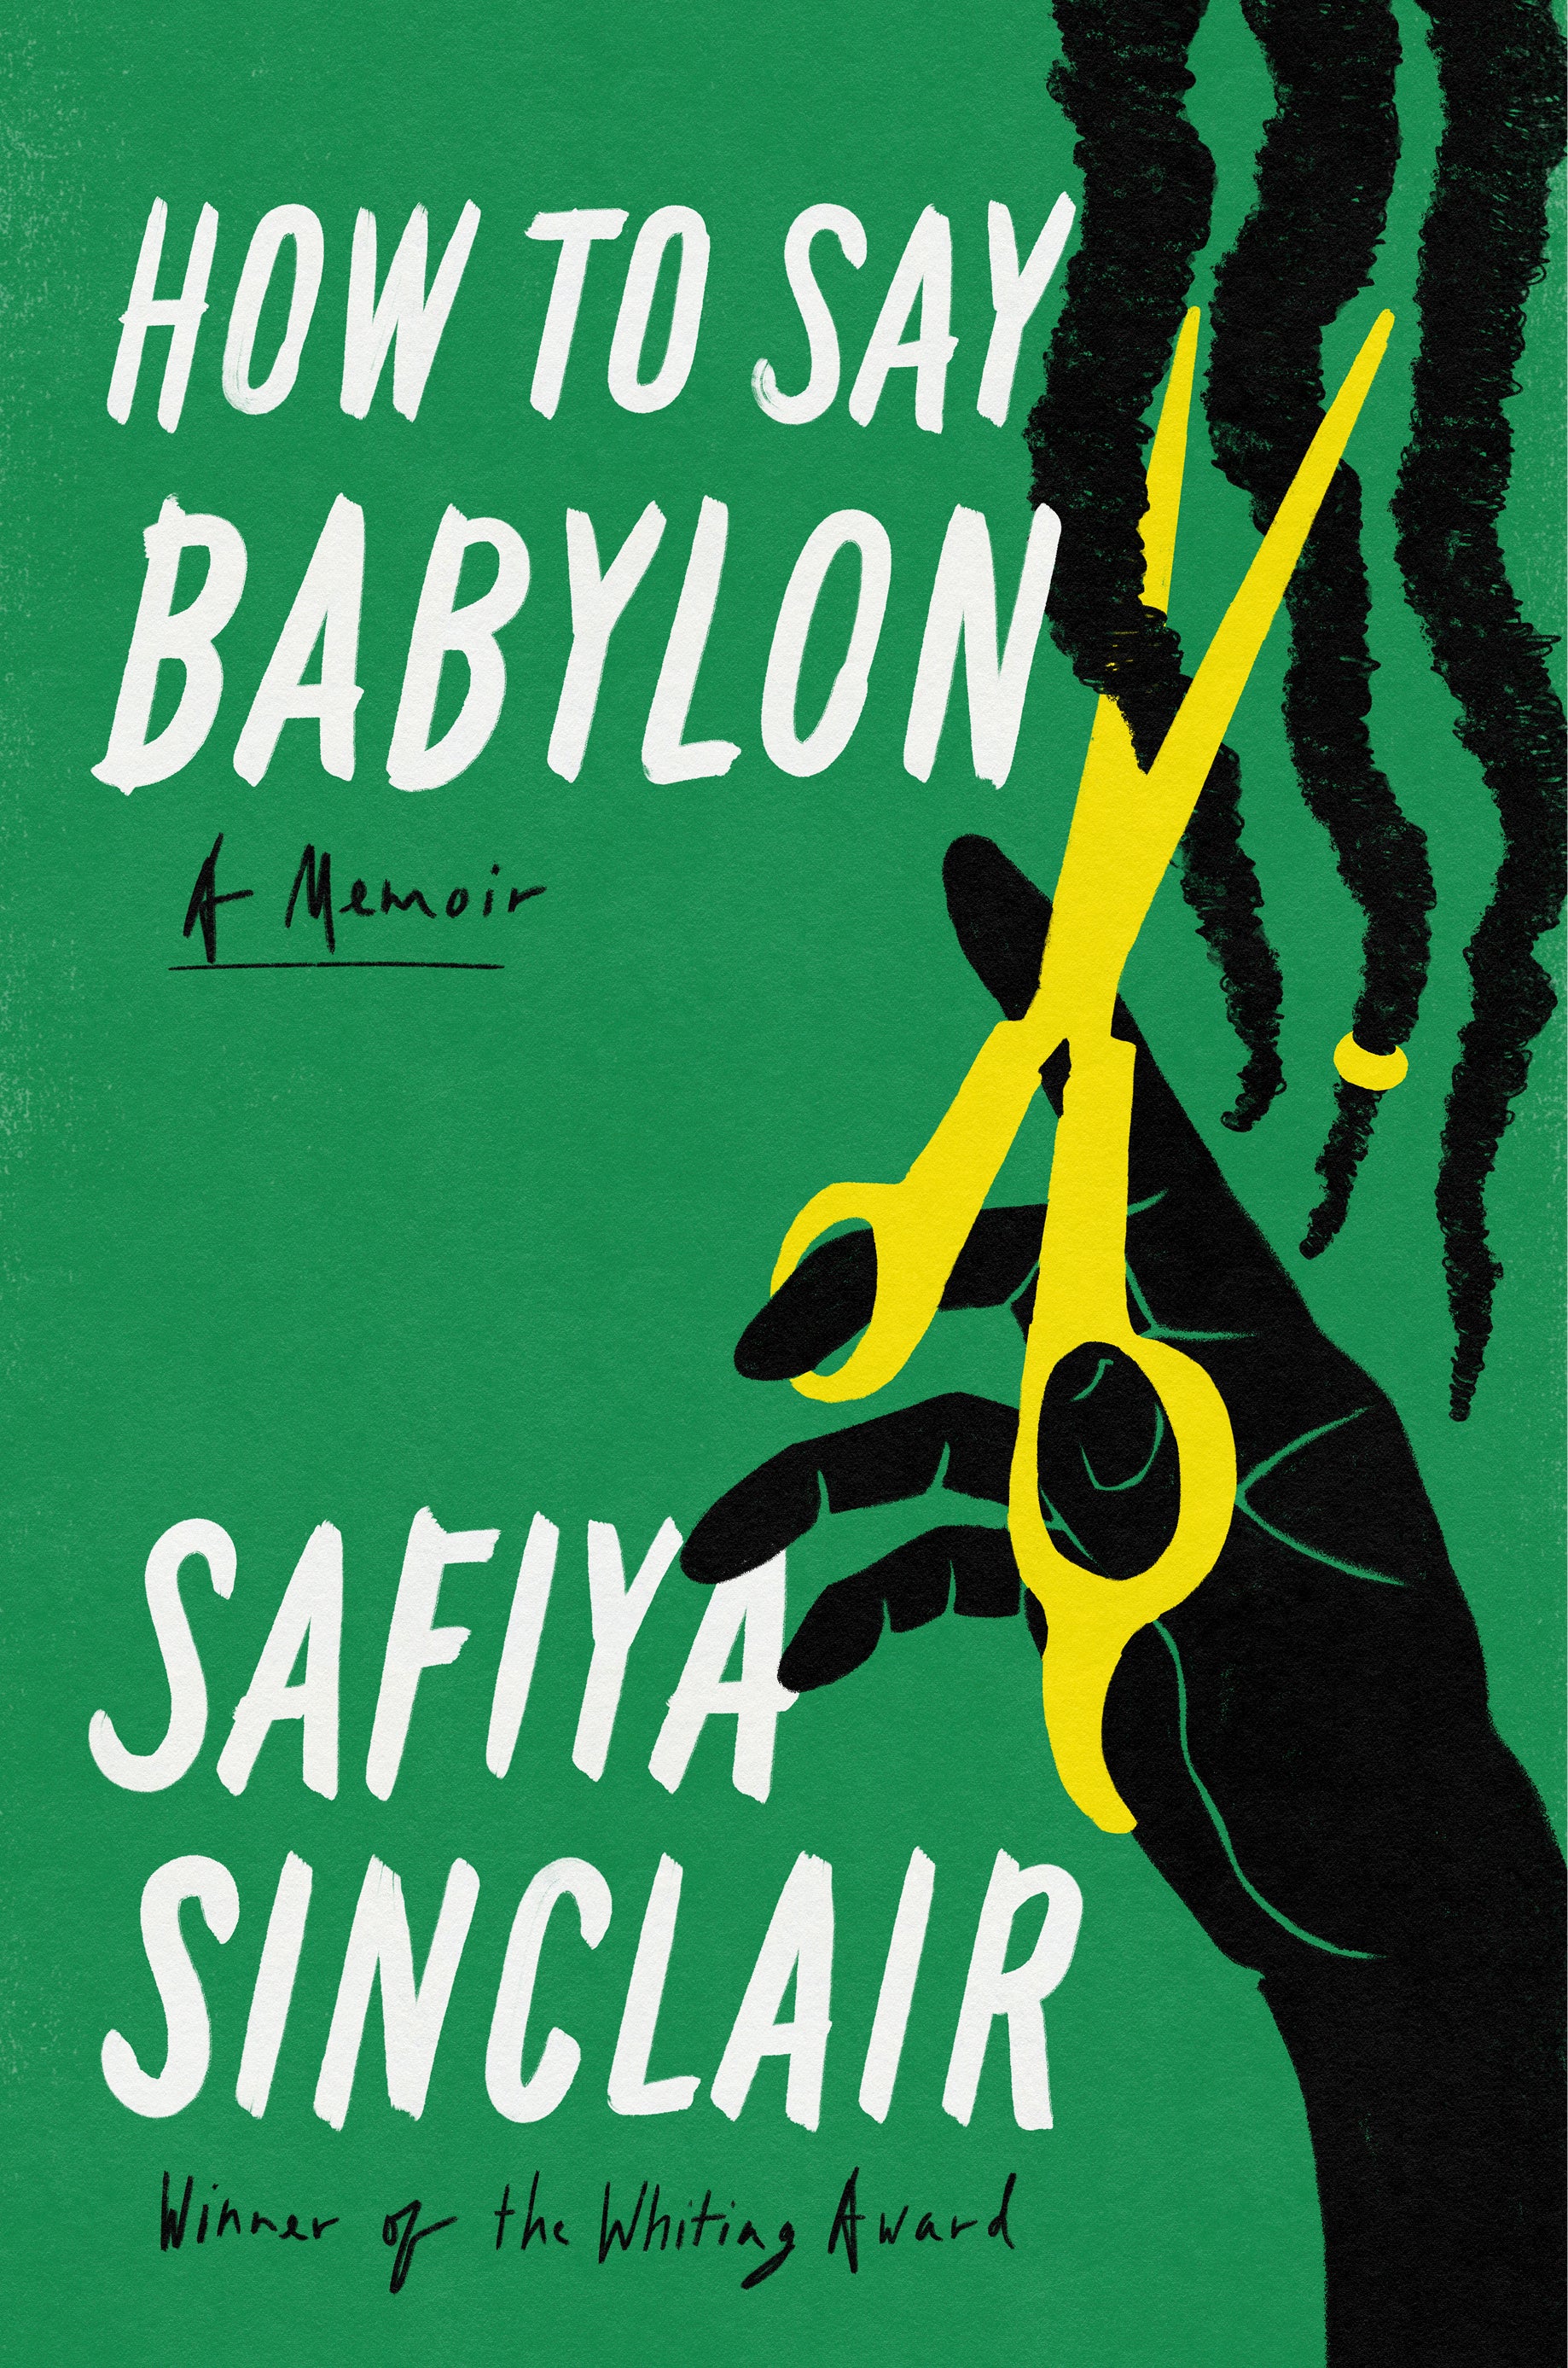 Book Review - How to Say Babylon